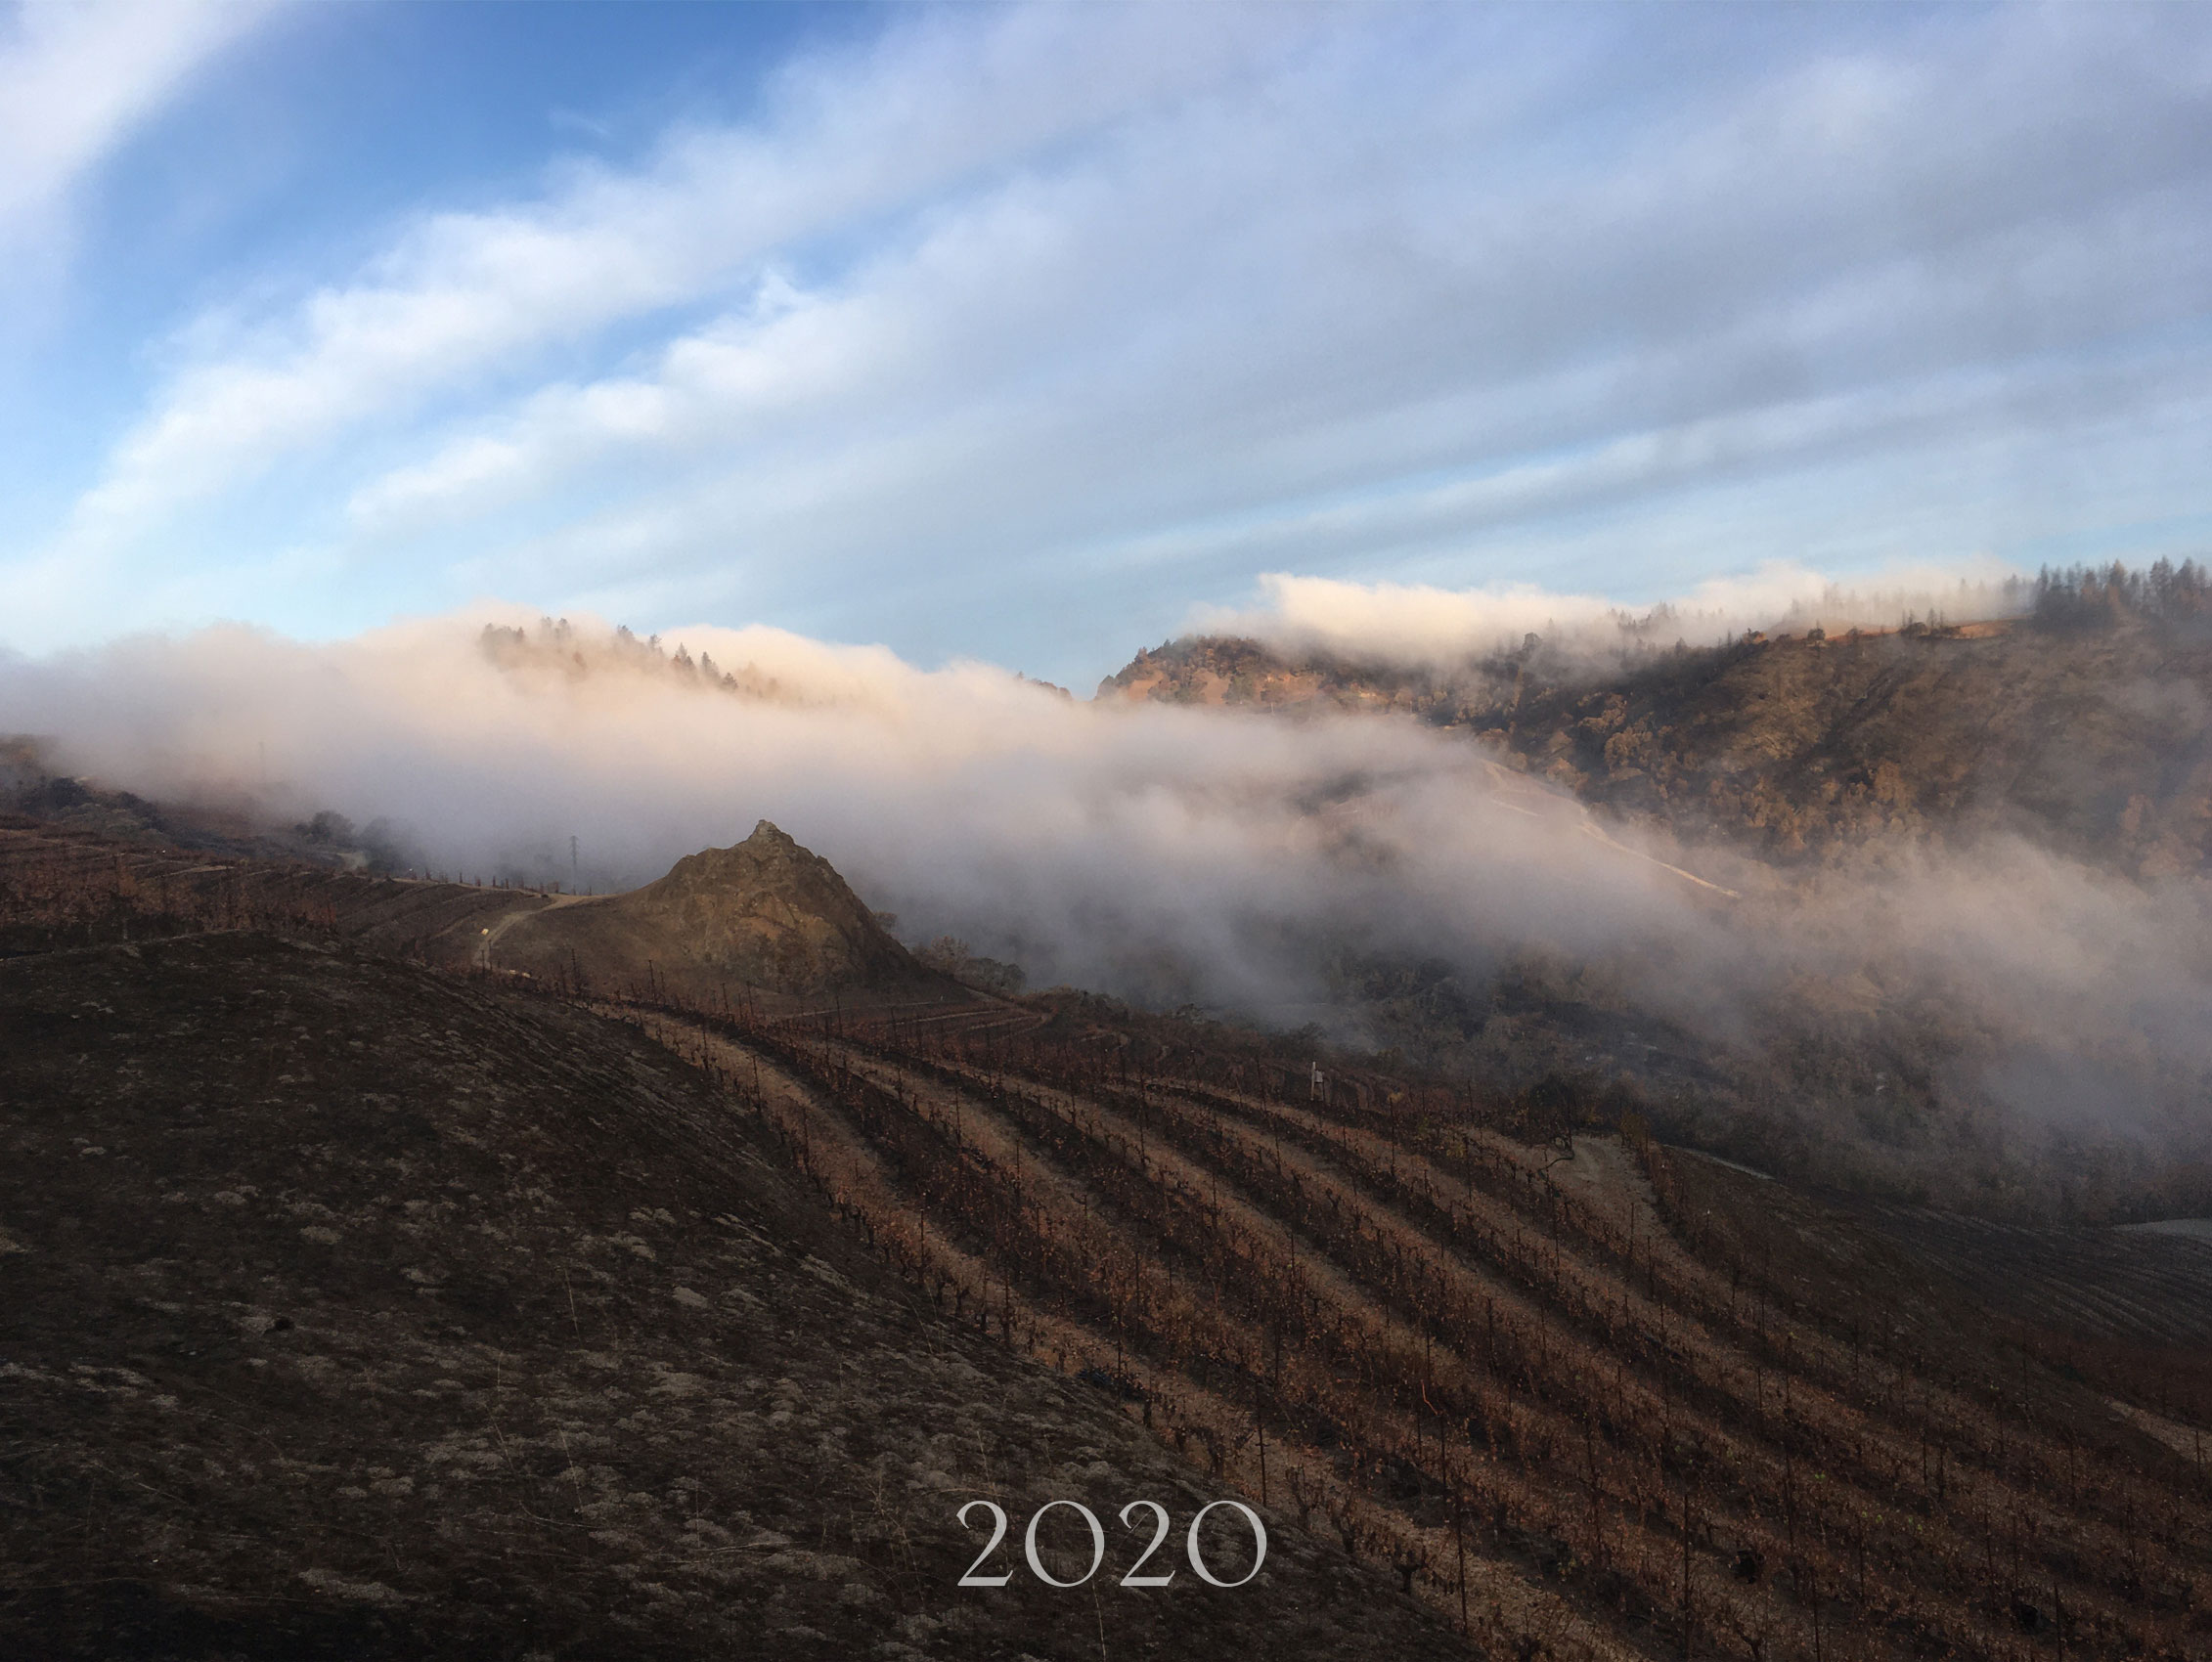 La Piedra and what was left of the vineyard after the 2020 Glass Fire